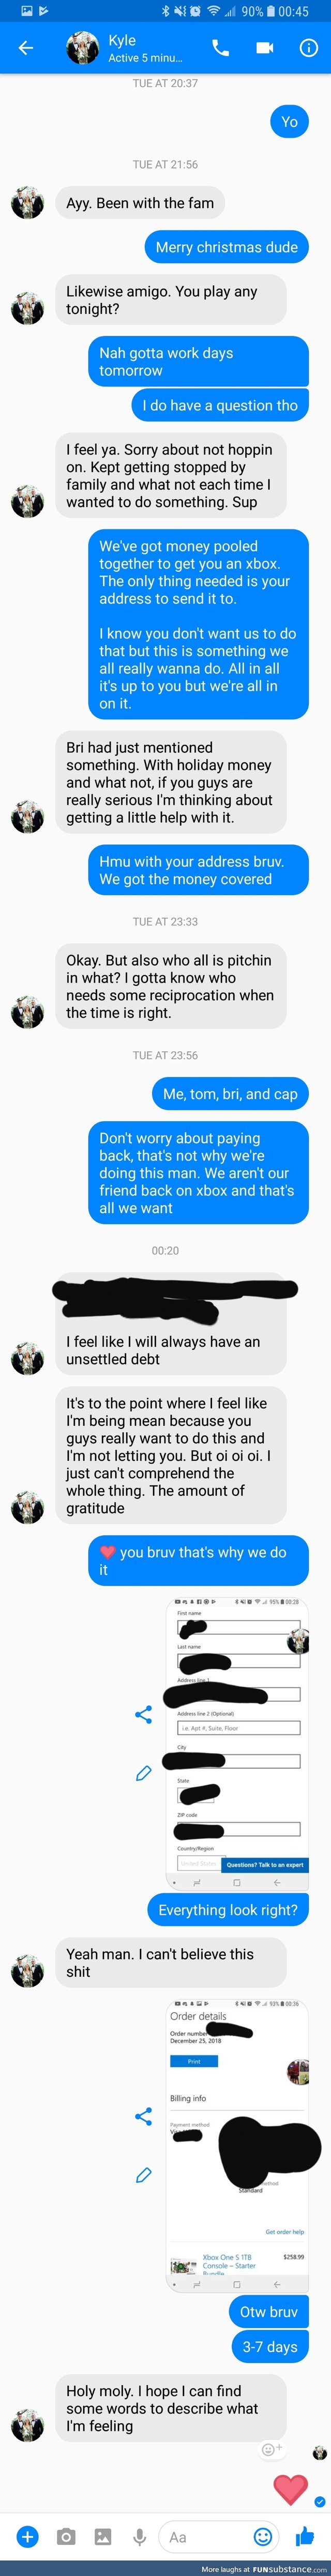 Bought one of our friends an xbox